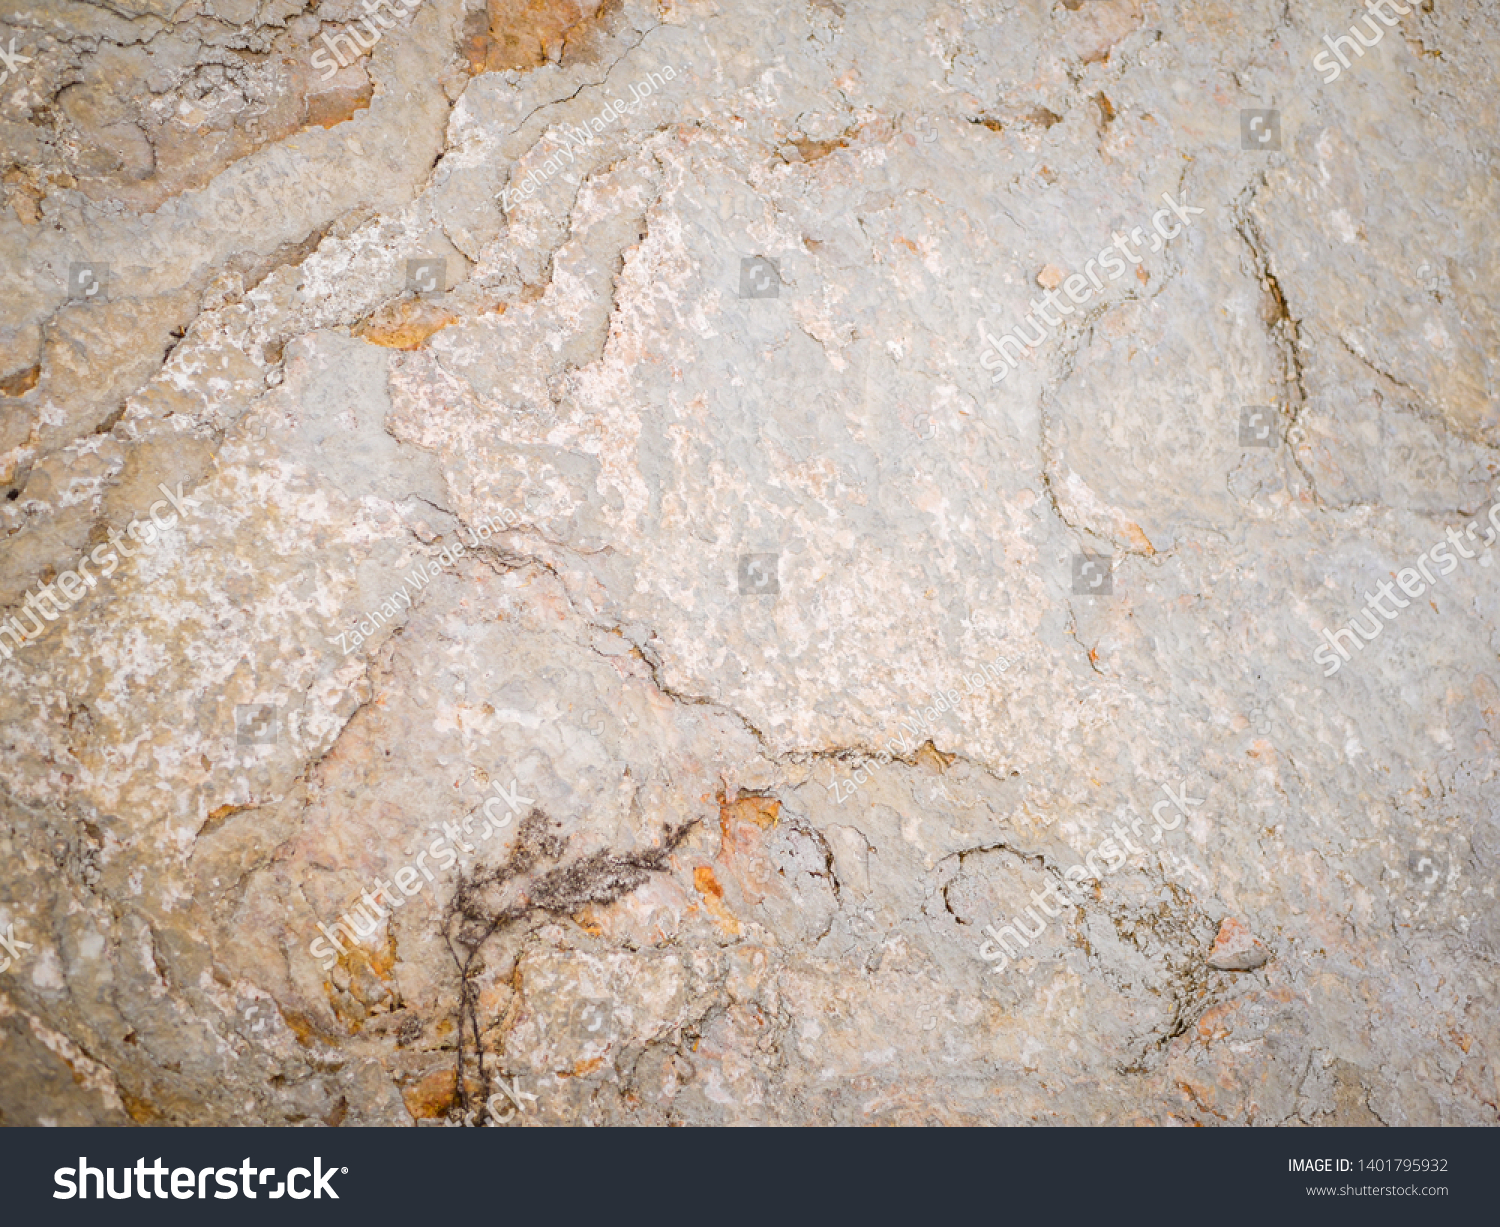 Rock Textures in Idaho State #1401795932